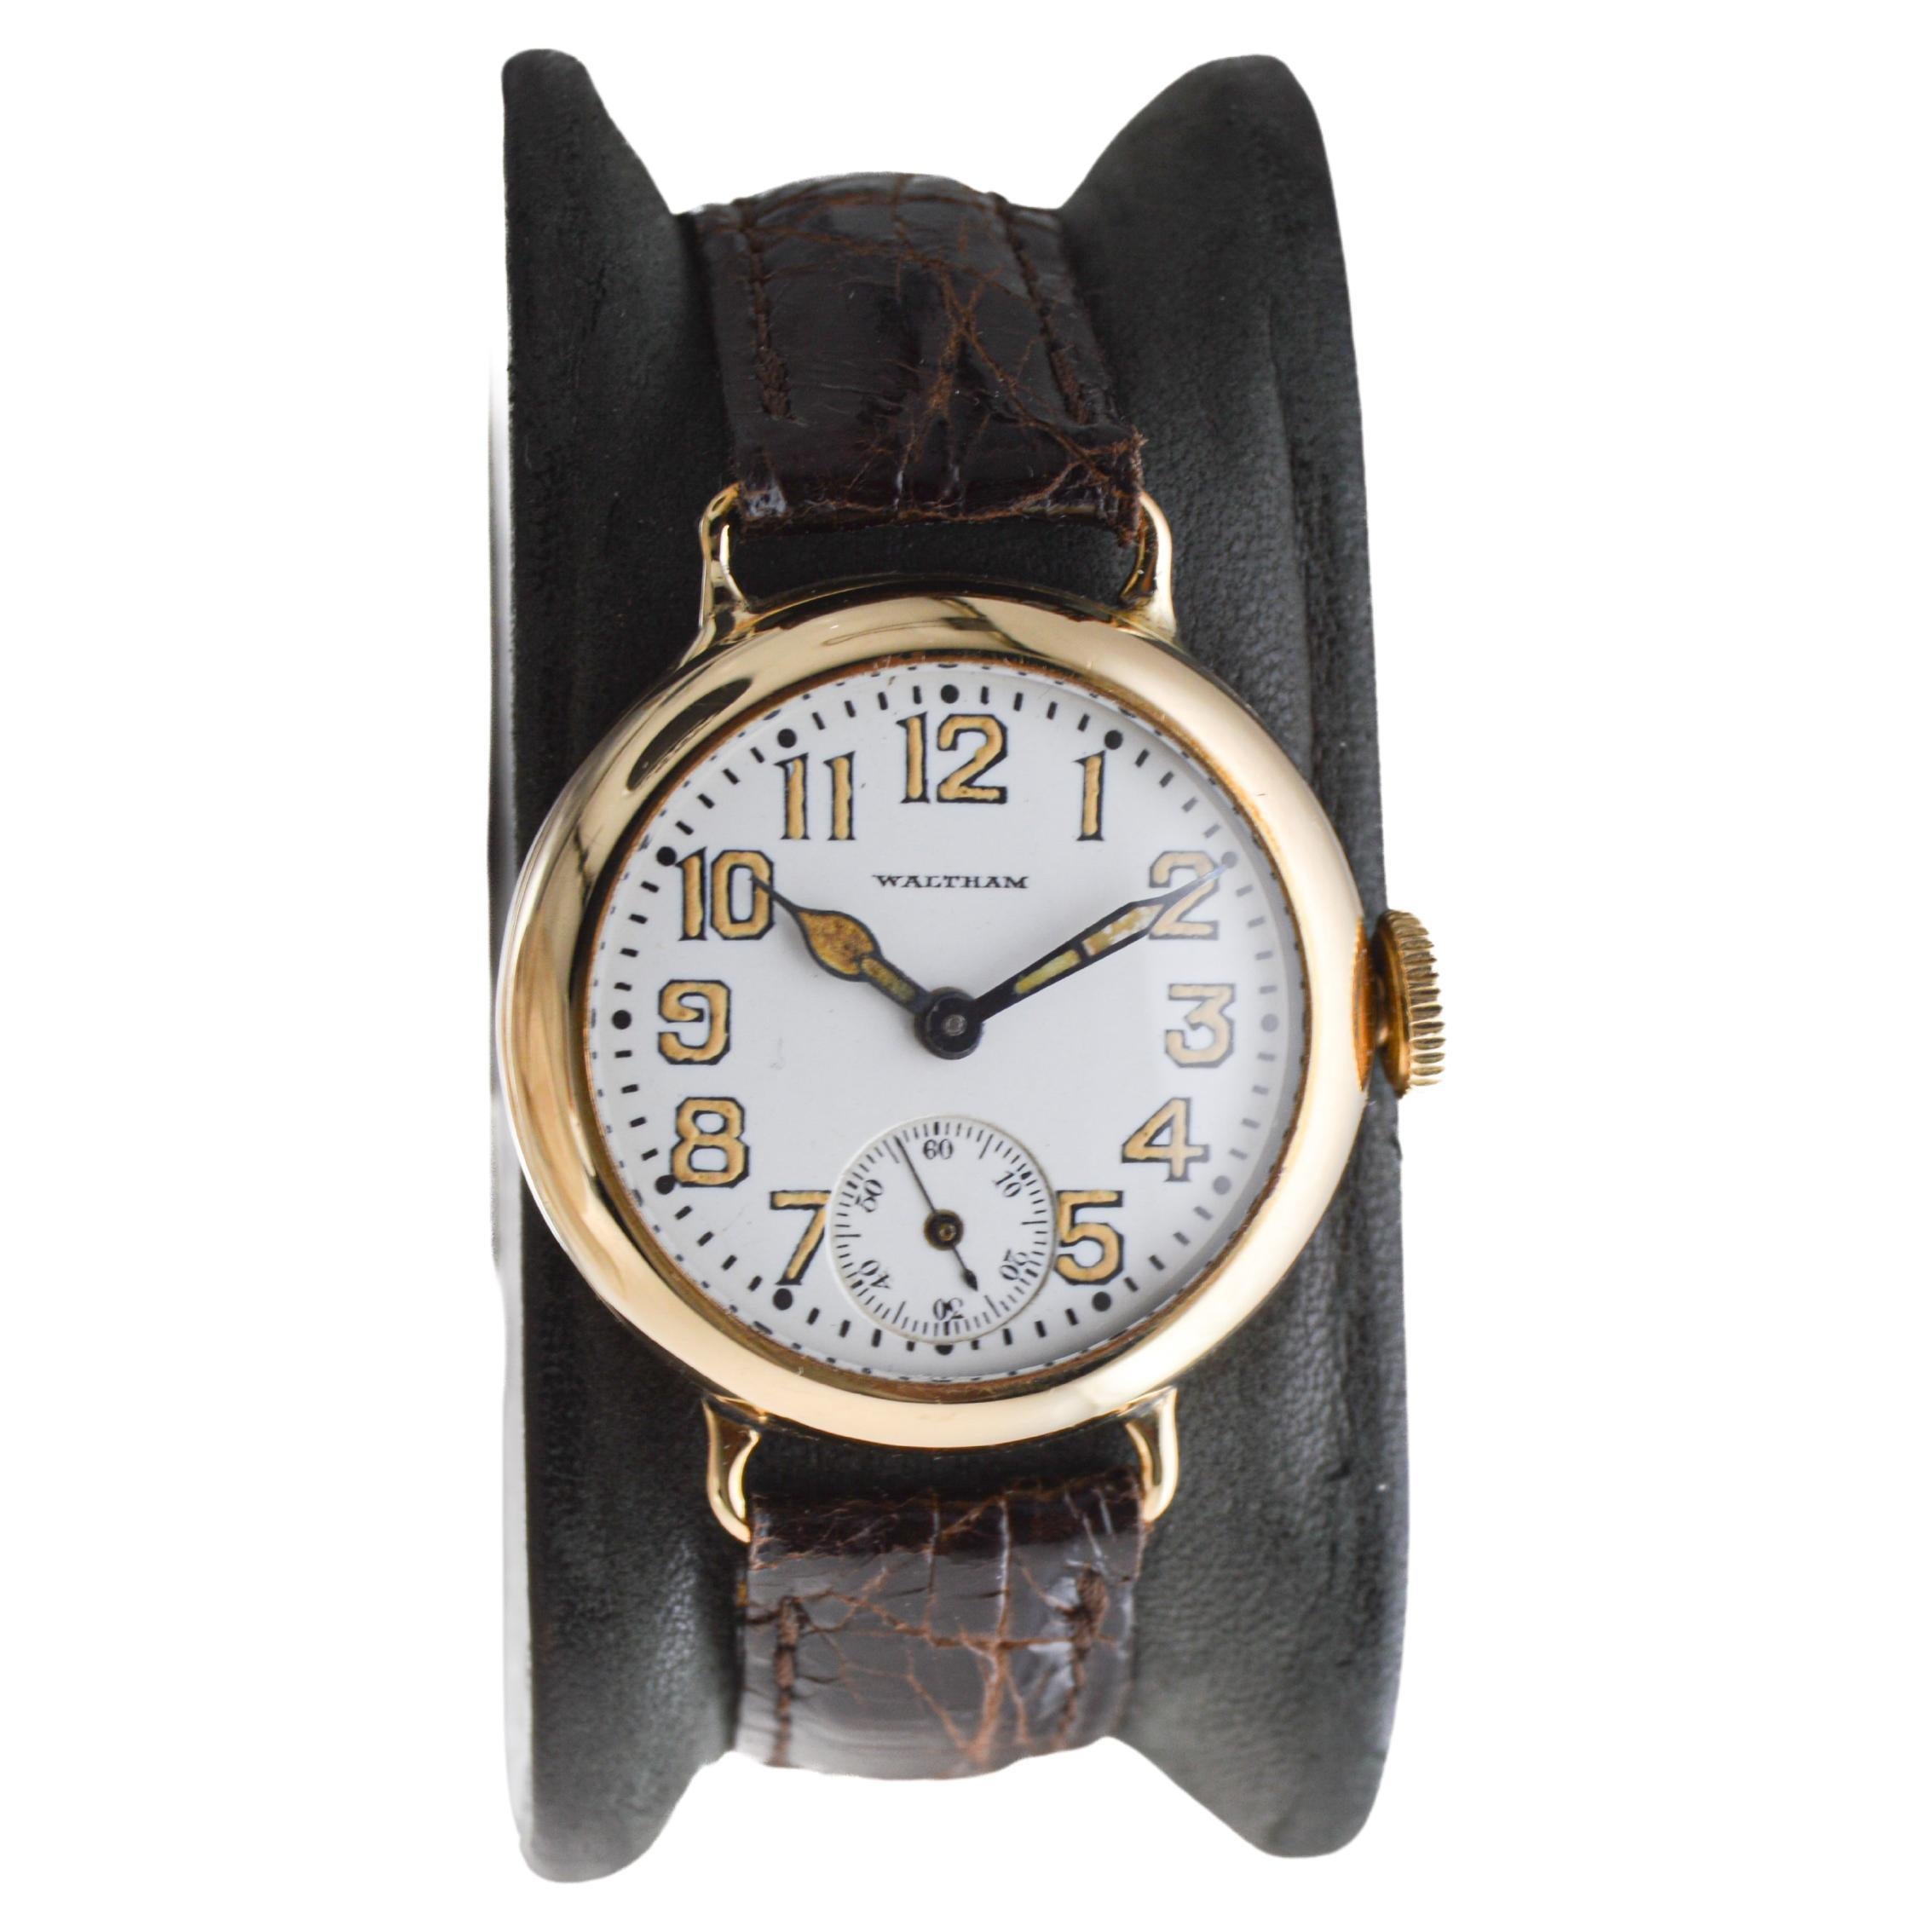 Waltham 14Kt. Gold Campaign Style Watch from 1915 with Original Enamel Dial 1929 For Sale